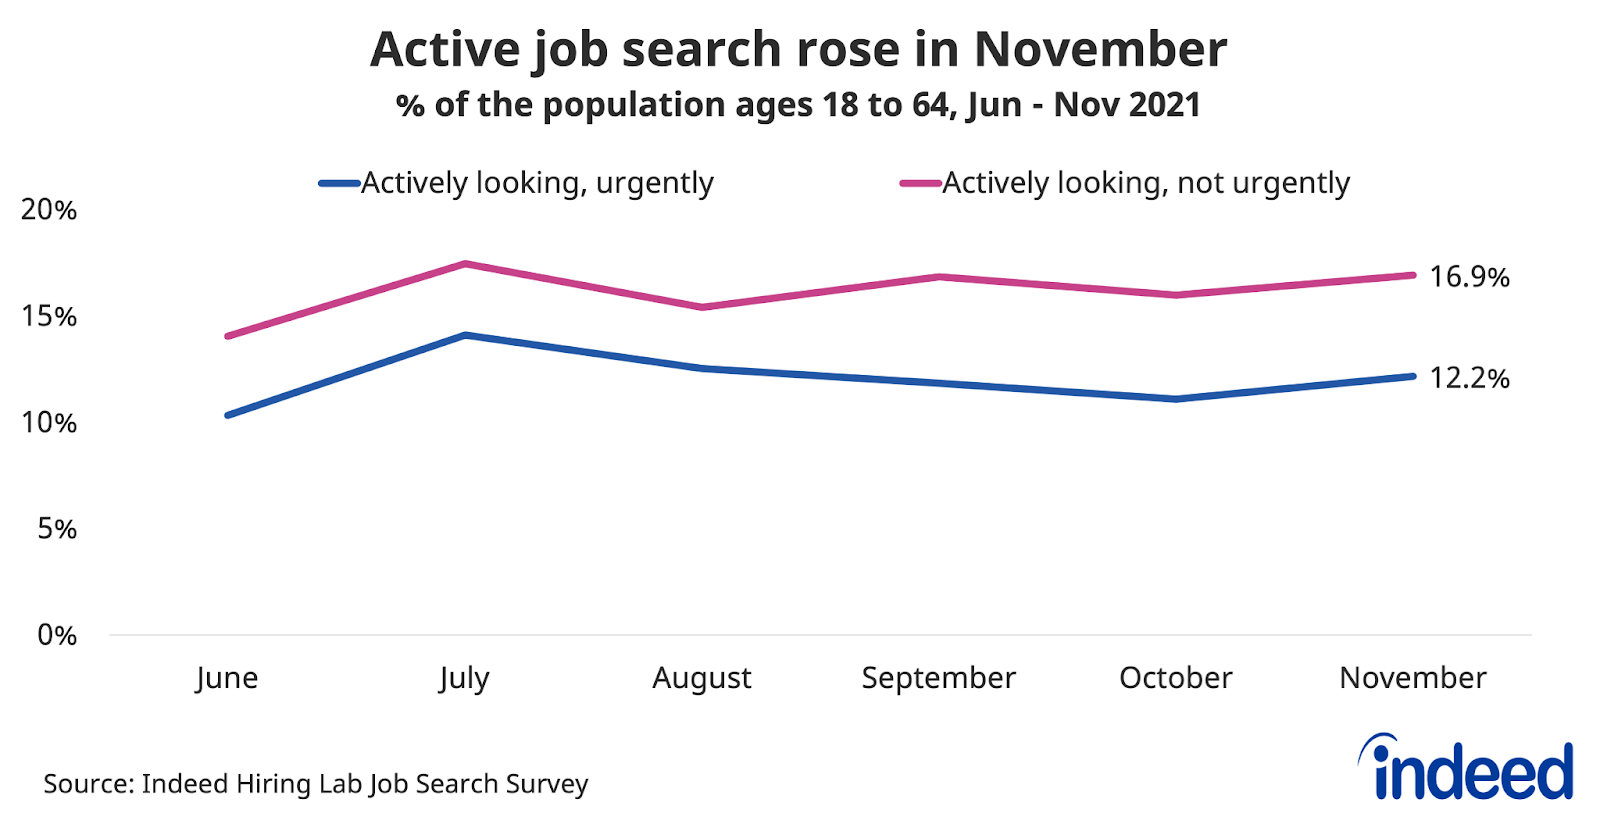 Line chart titled “Active job search rose in November.”